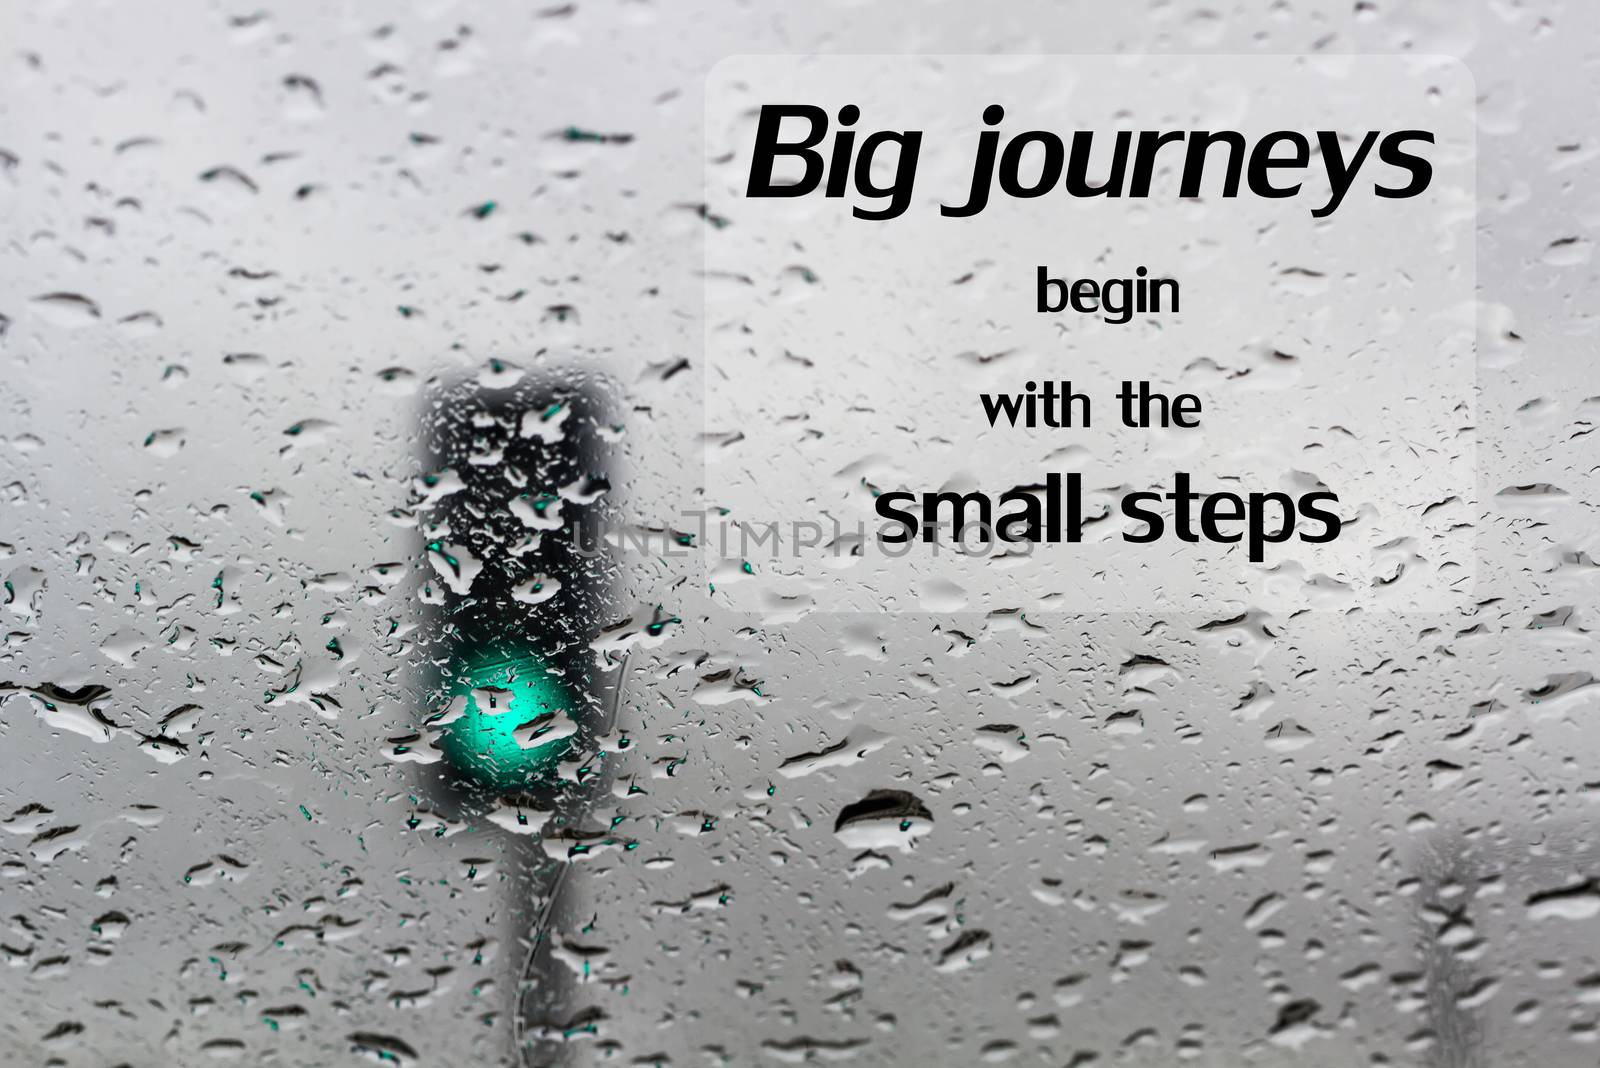 Word  Big journeys begin with the small steps.Inspirational motivational quote on traffic light on a rainy day window background